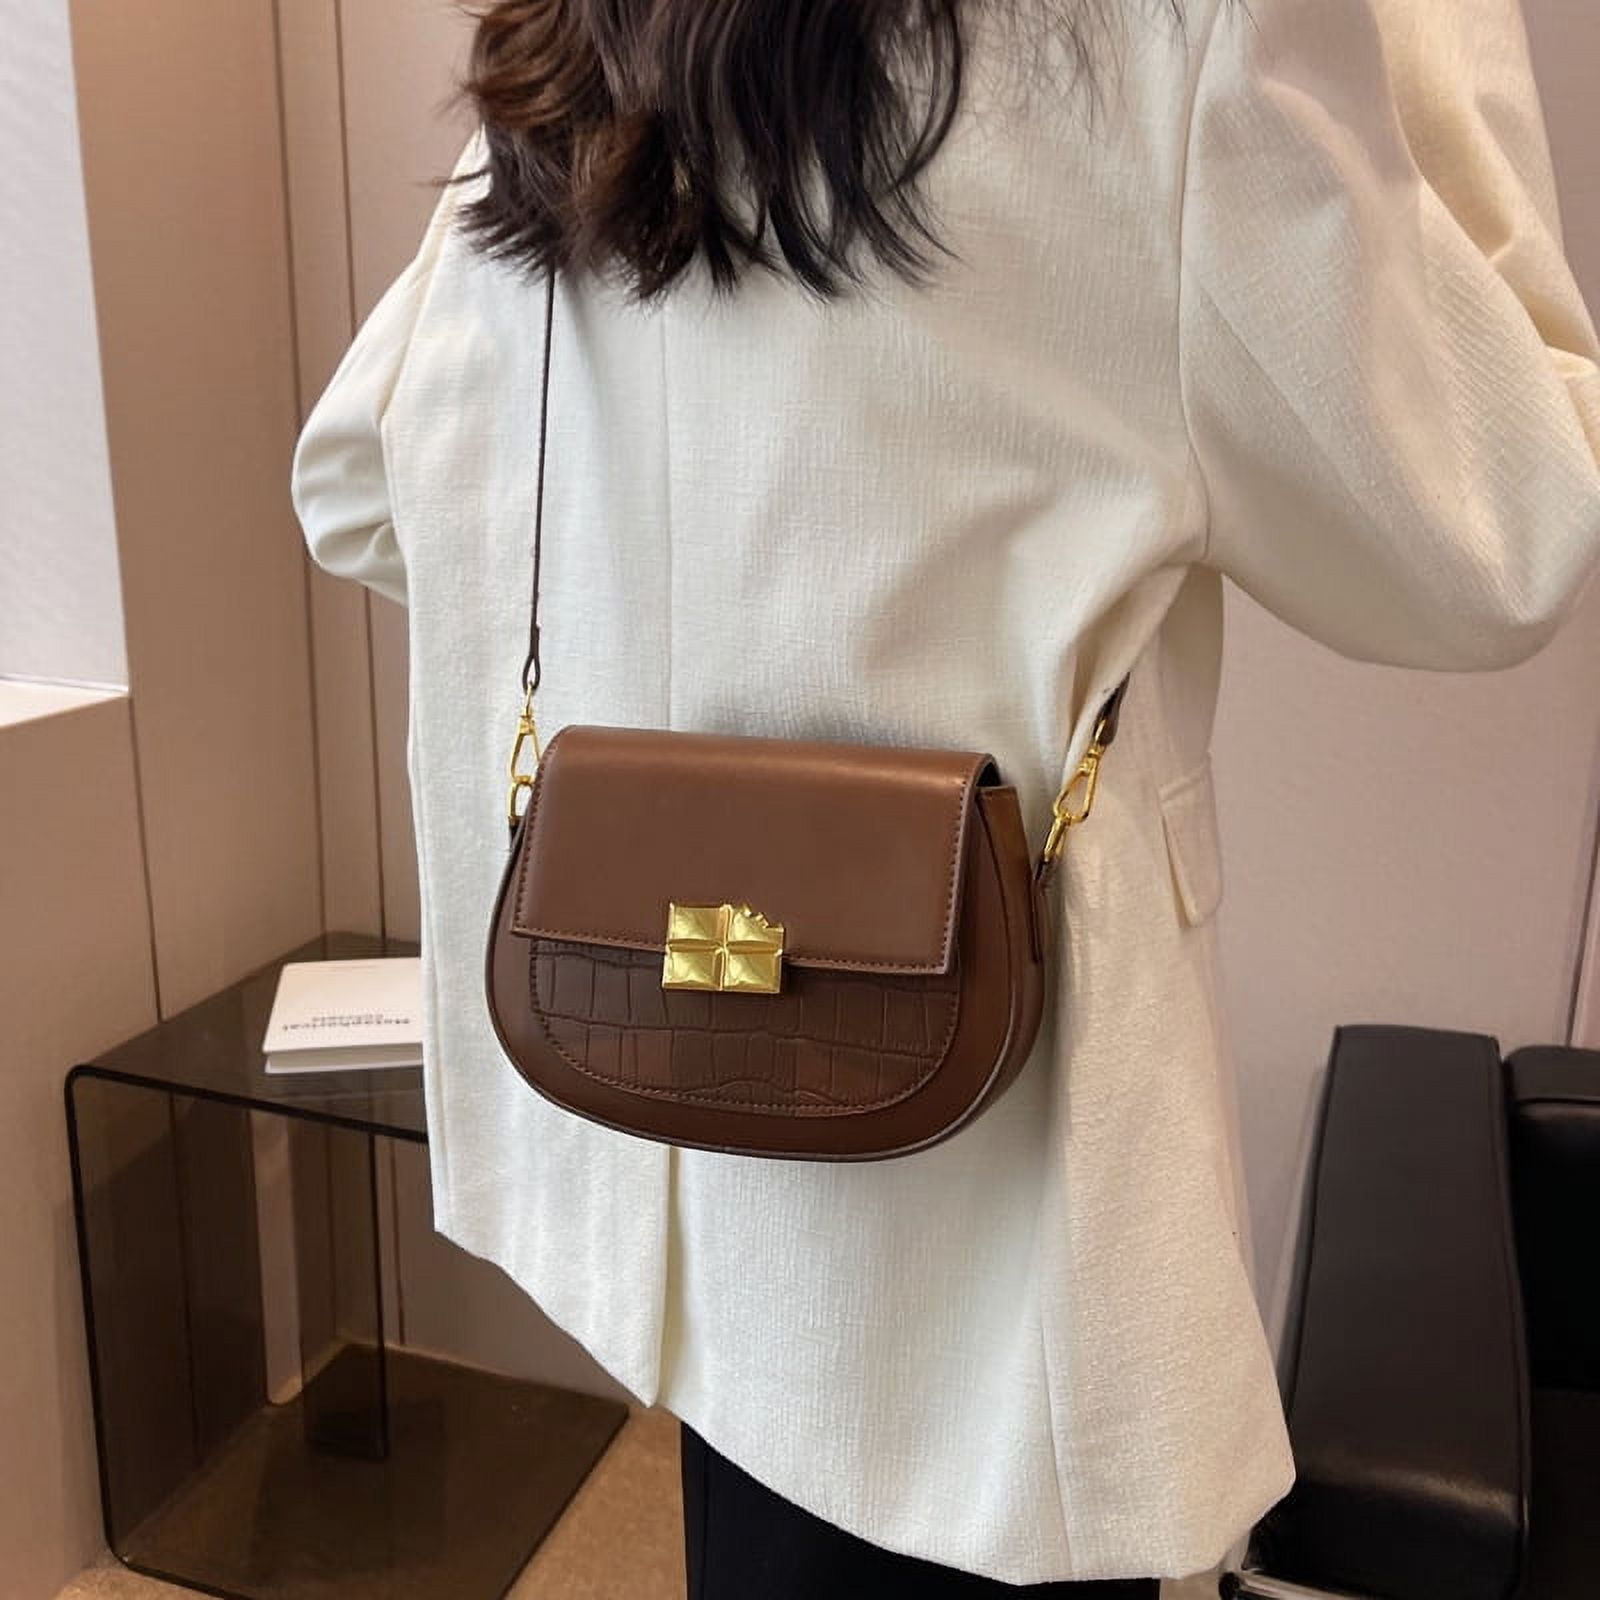 Qwzndzgr This Year's Popular Bag Women's Spring and Autumn 2022 Simple New Fashion Fashion Cross-body Bag Small Design Portable Small Square Bag